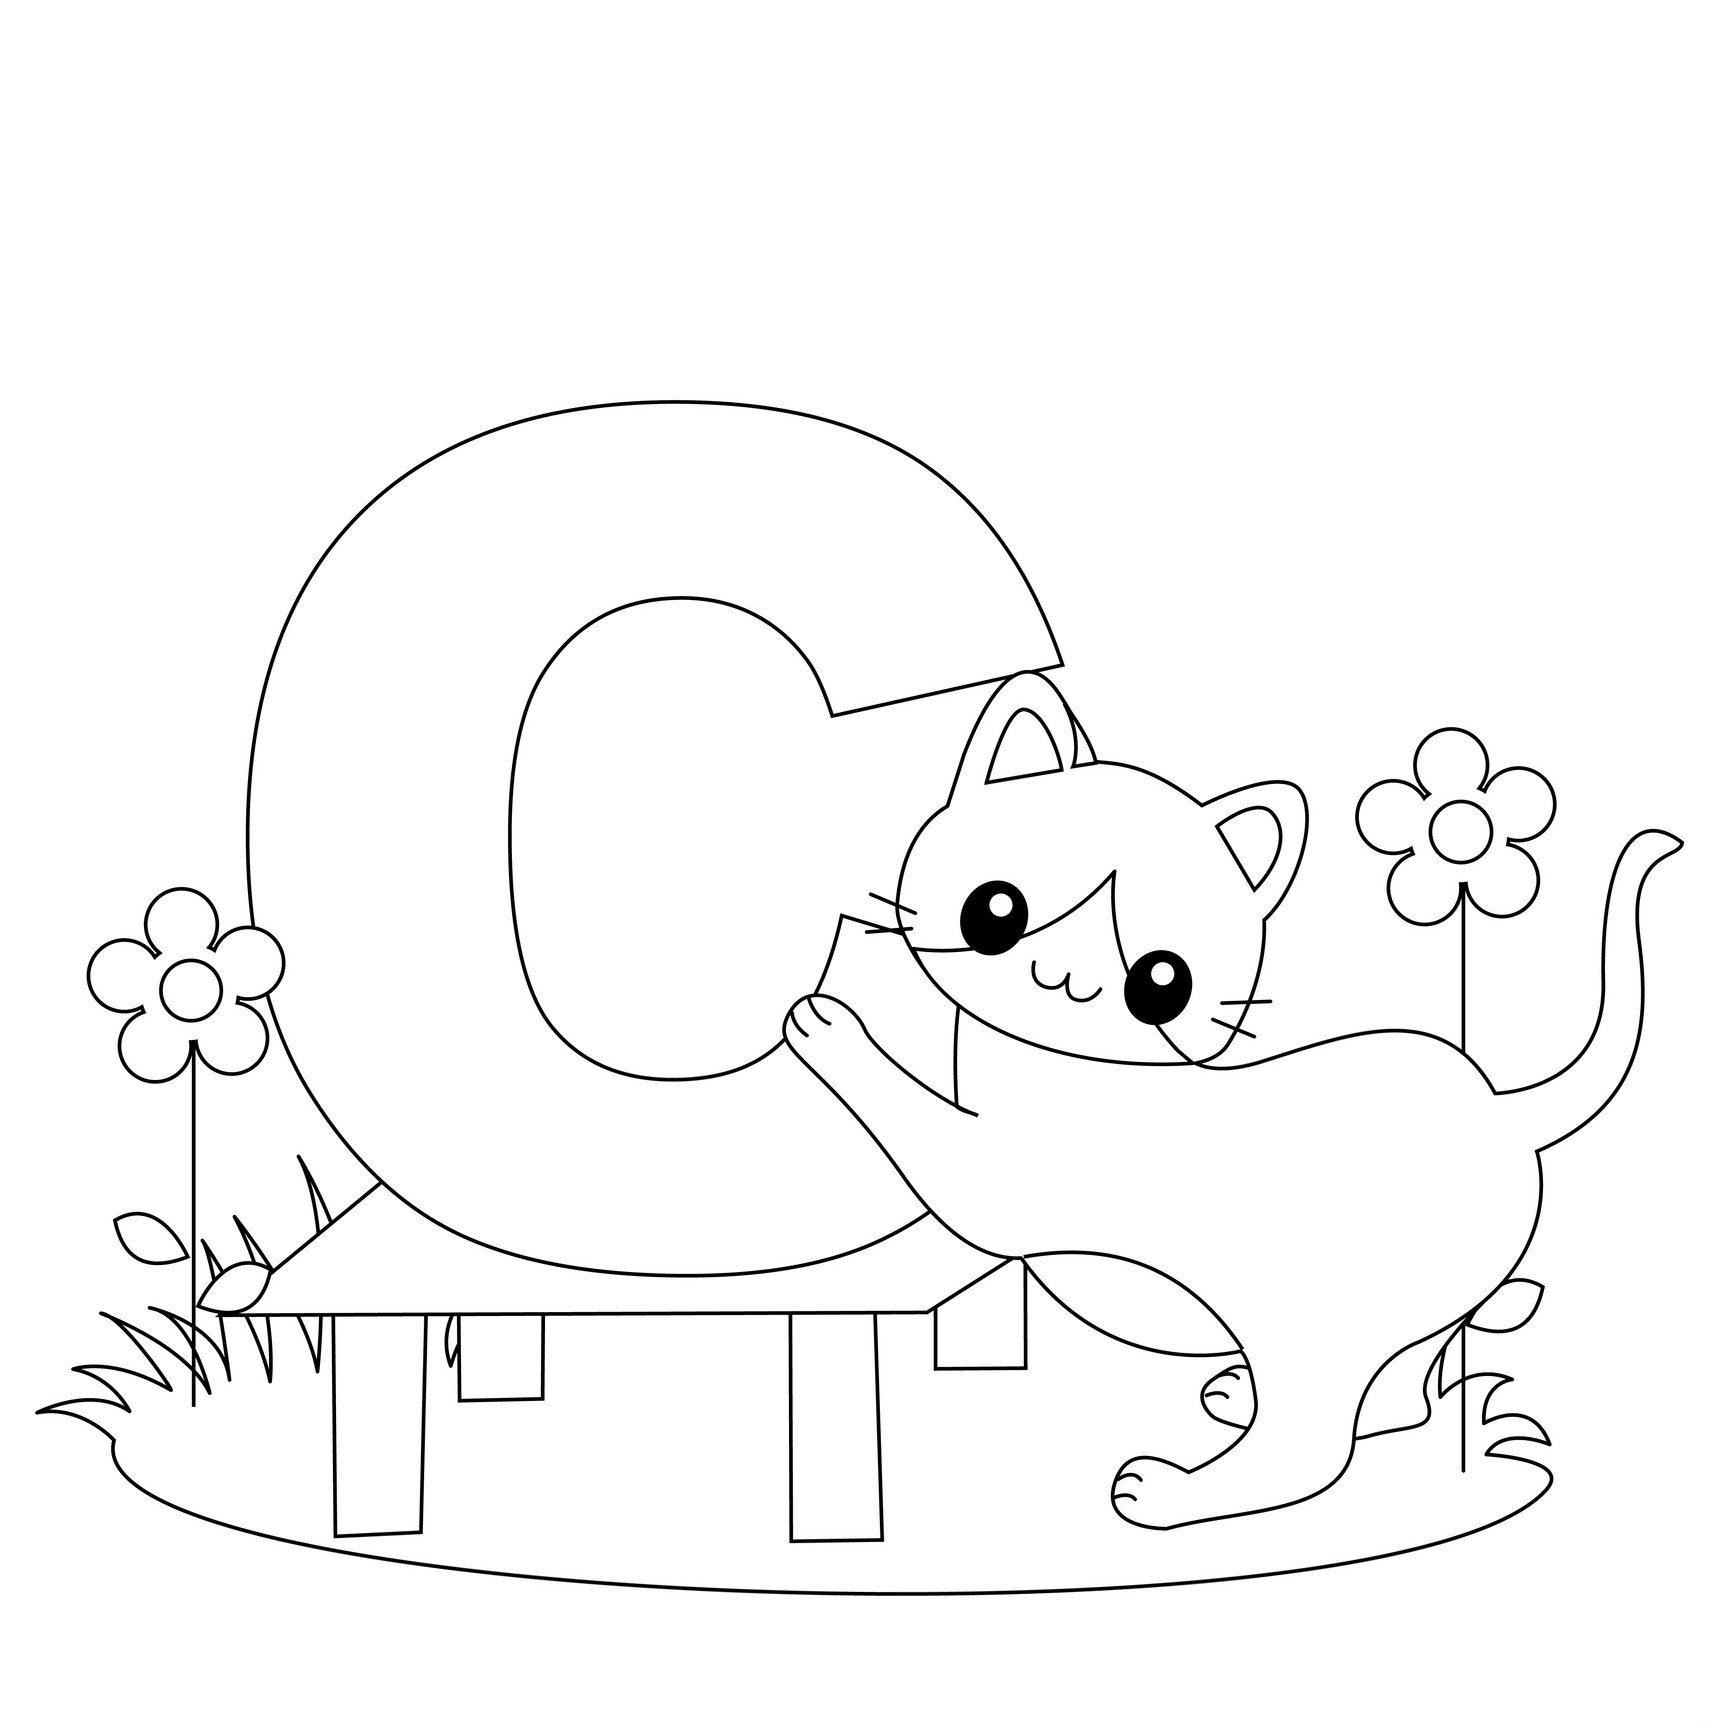 Letter C Coloring Pages
 Free Printable Alphabet Coloring Pages for Kids Best